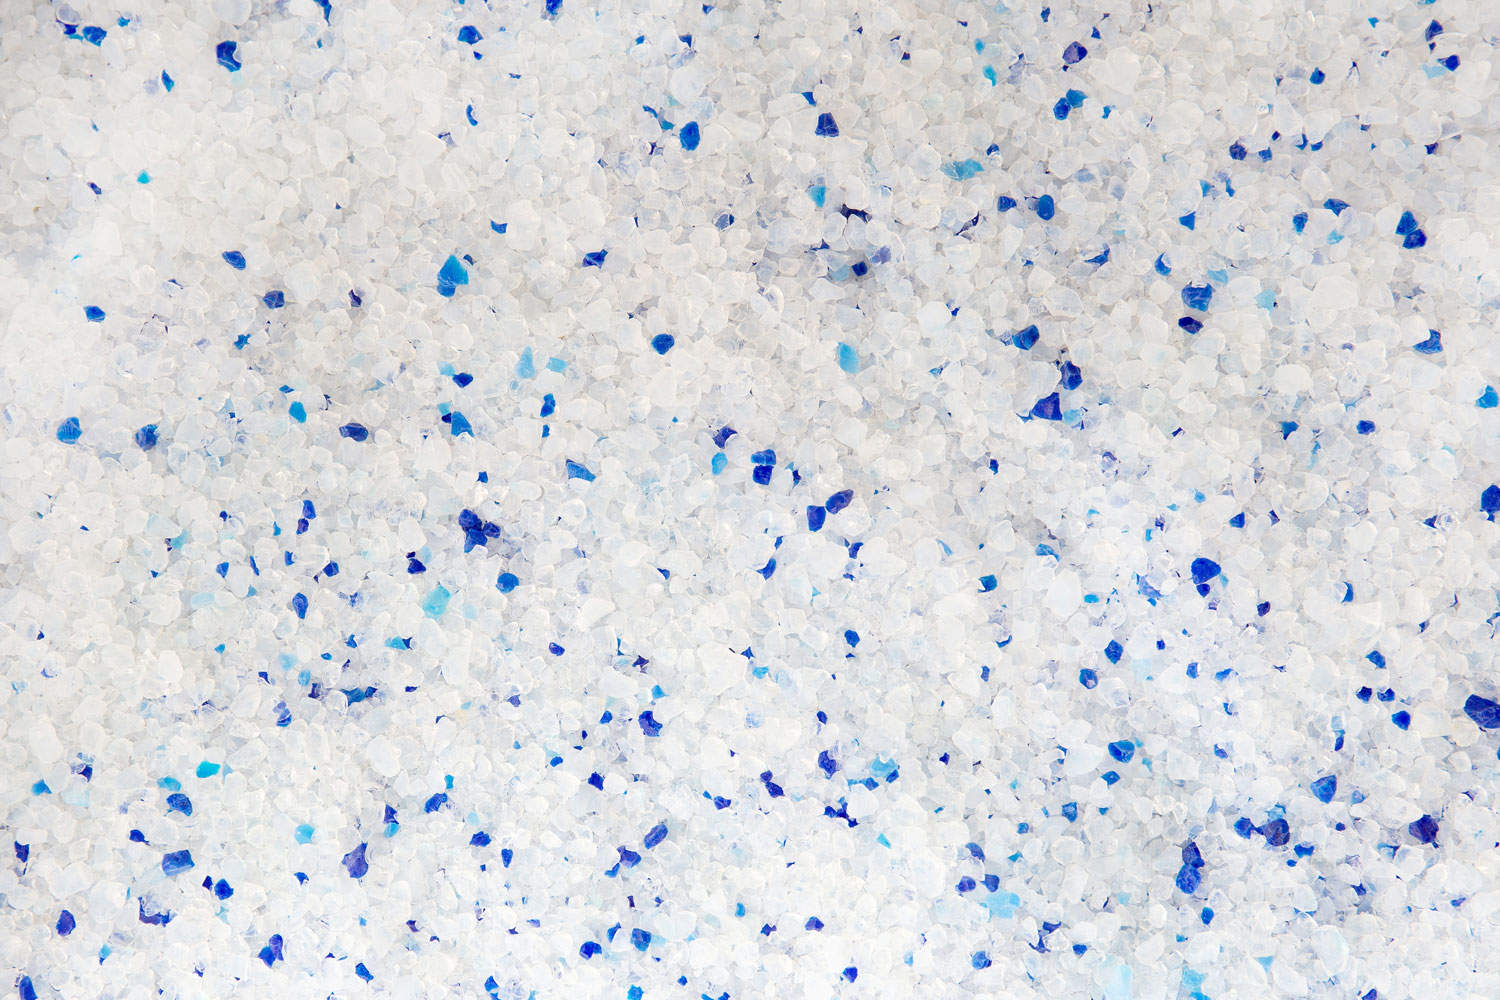 Silica gel white with blue crystals cat litter close-up. Abstract background of pure silica gel crystals.
